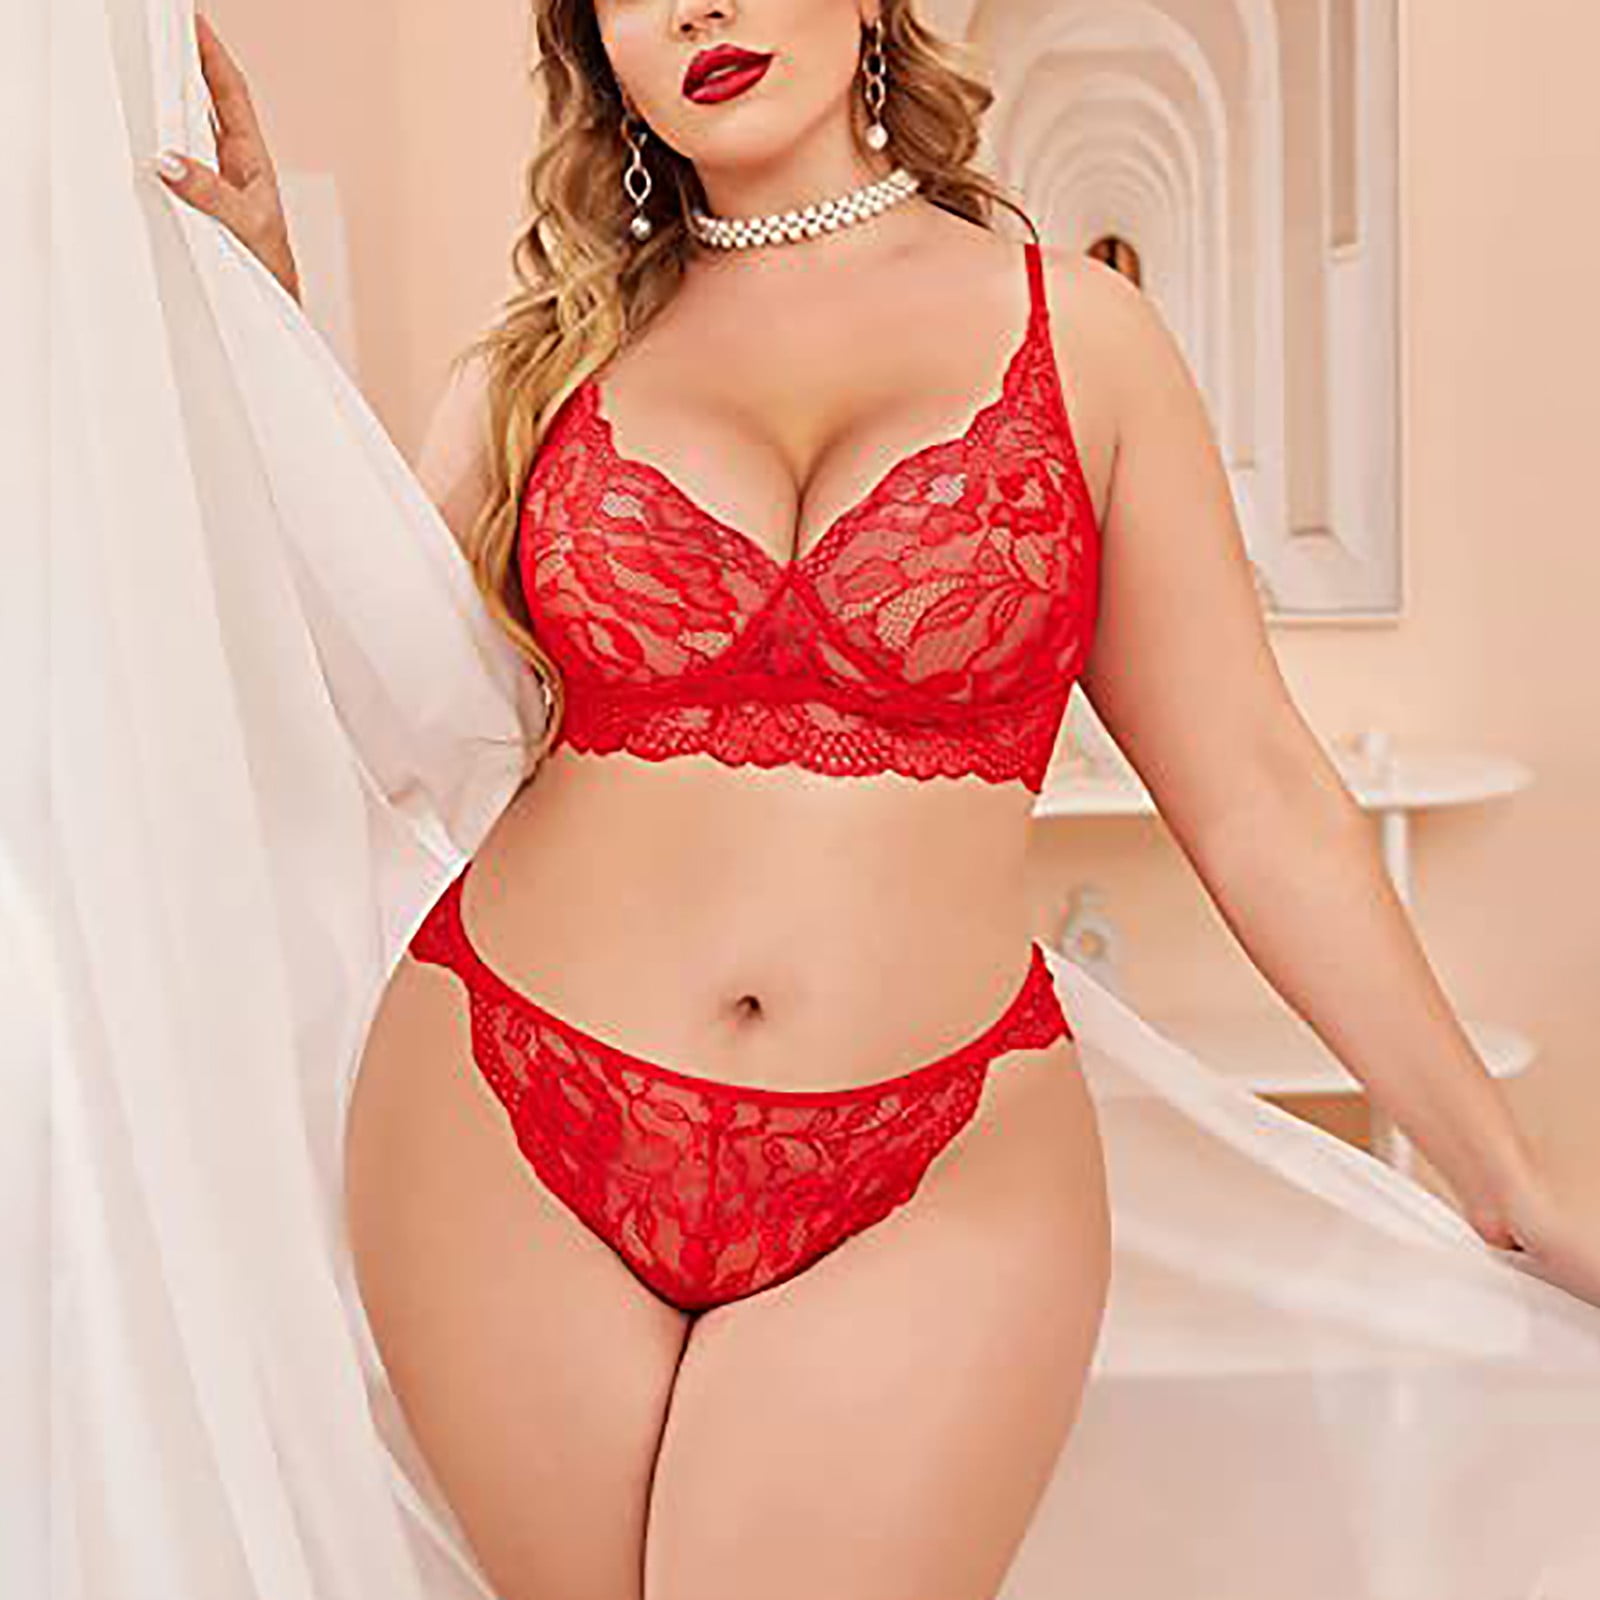 Aayomet Lingerie for Women Plus Size Women Plus Size Lingerie Lace Bodysuit  Exotic Teddy Lingerie Strappy Bra And Panty,Red 3XL 